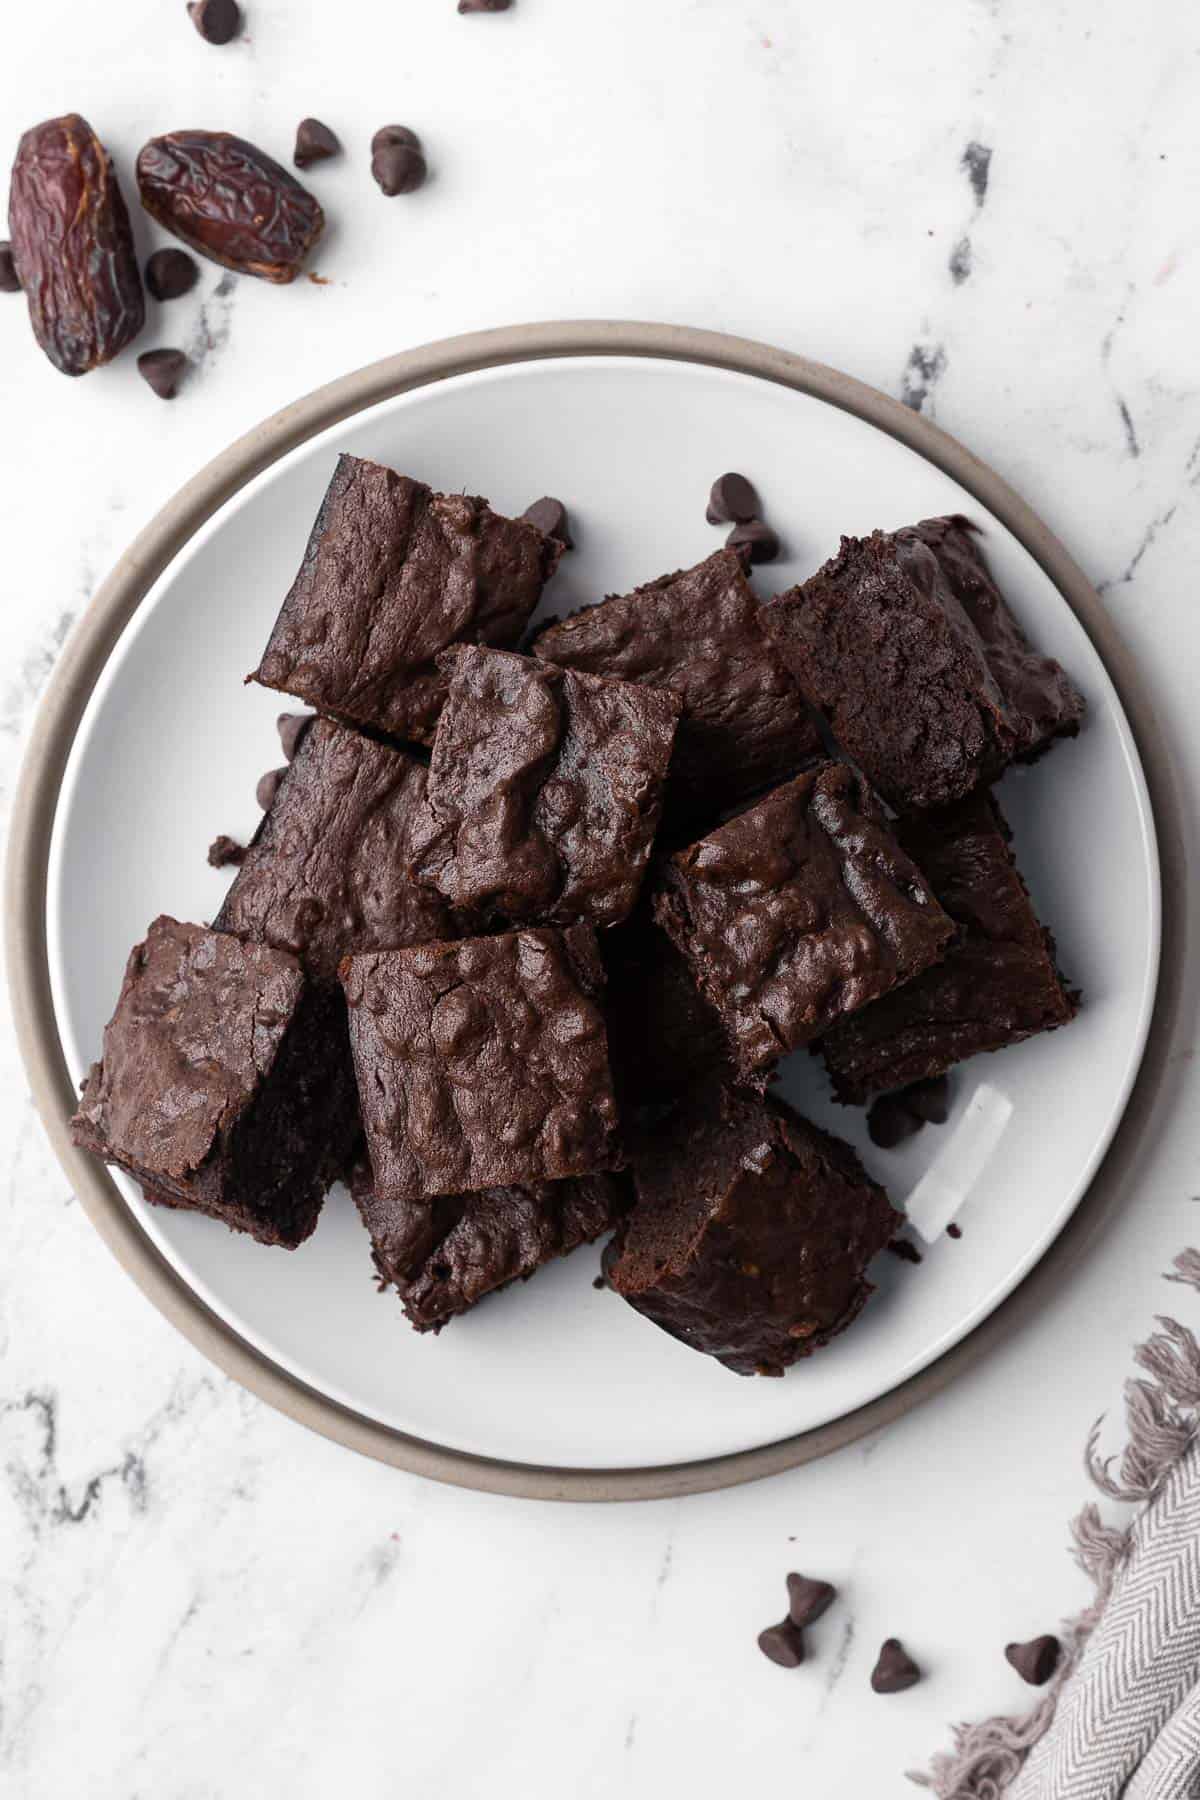 Date brownies squares on a round plate with a few chocolate chips and whole dates nearby.